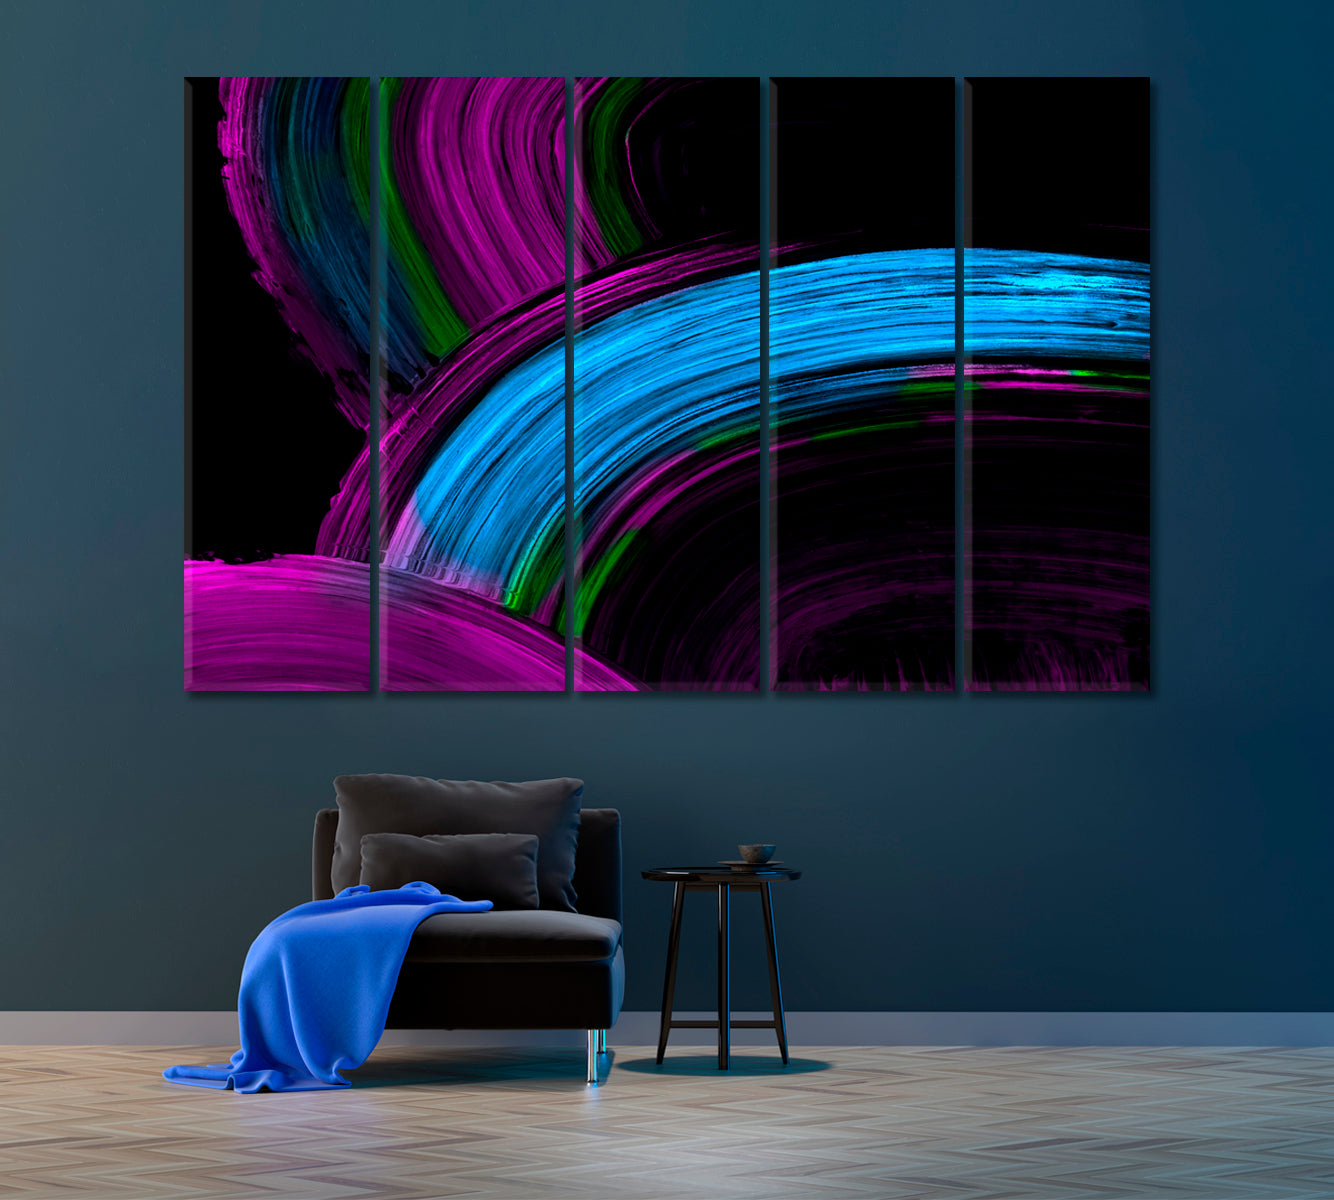 Creative Neon Violet and Blue Brush Strokes Canvas Print ArtLexy 5 Panels 36"x24" inches 